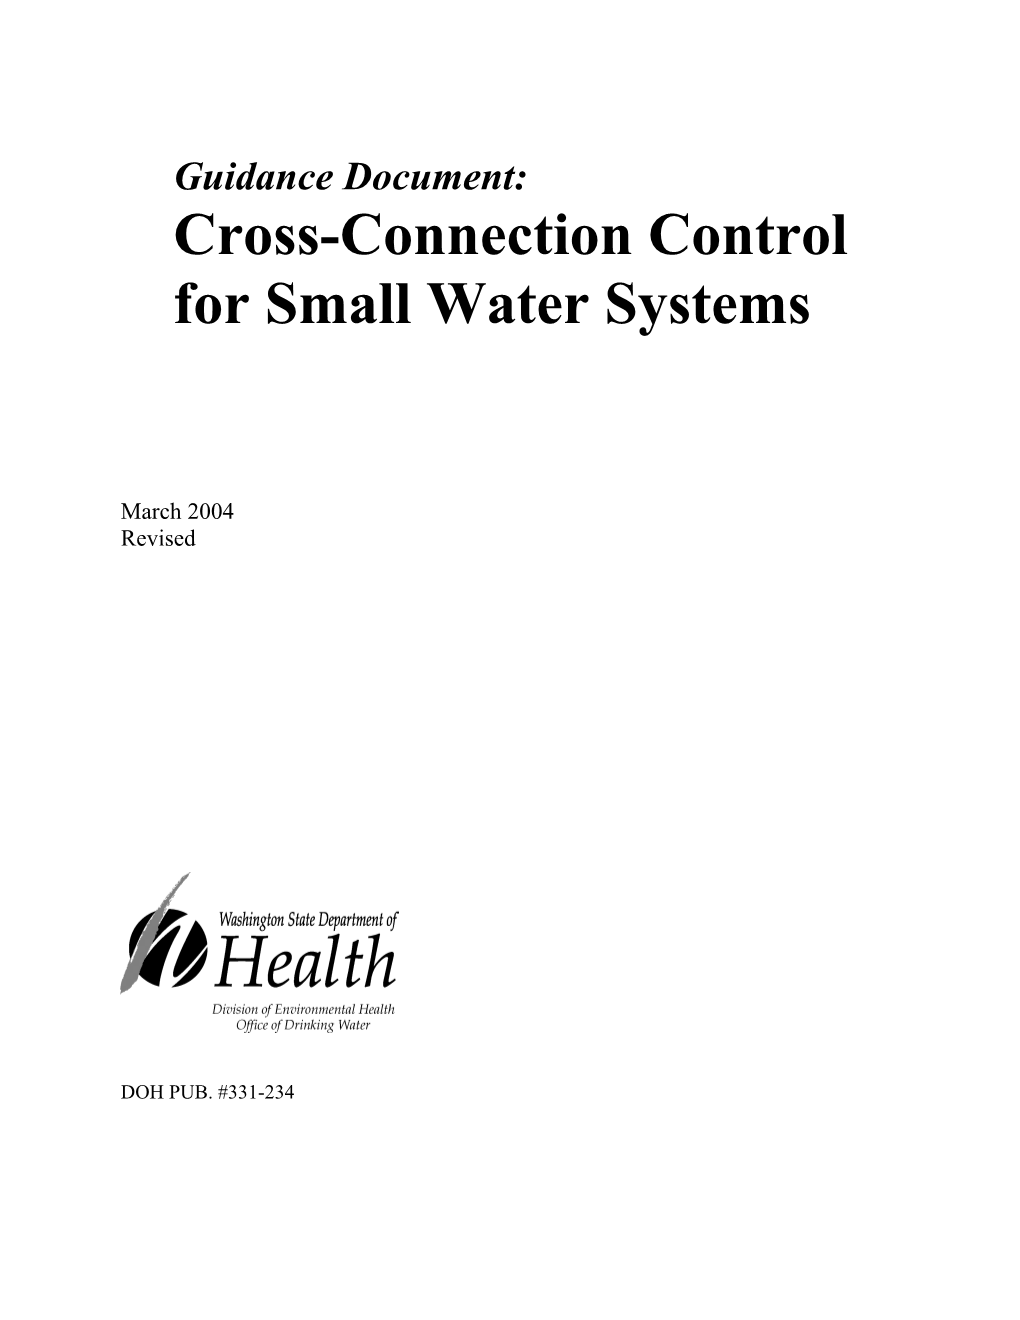 For Small Water Systems